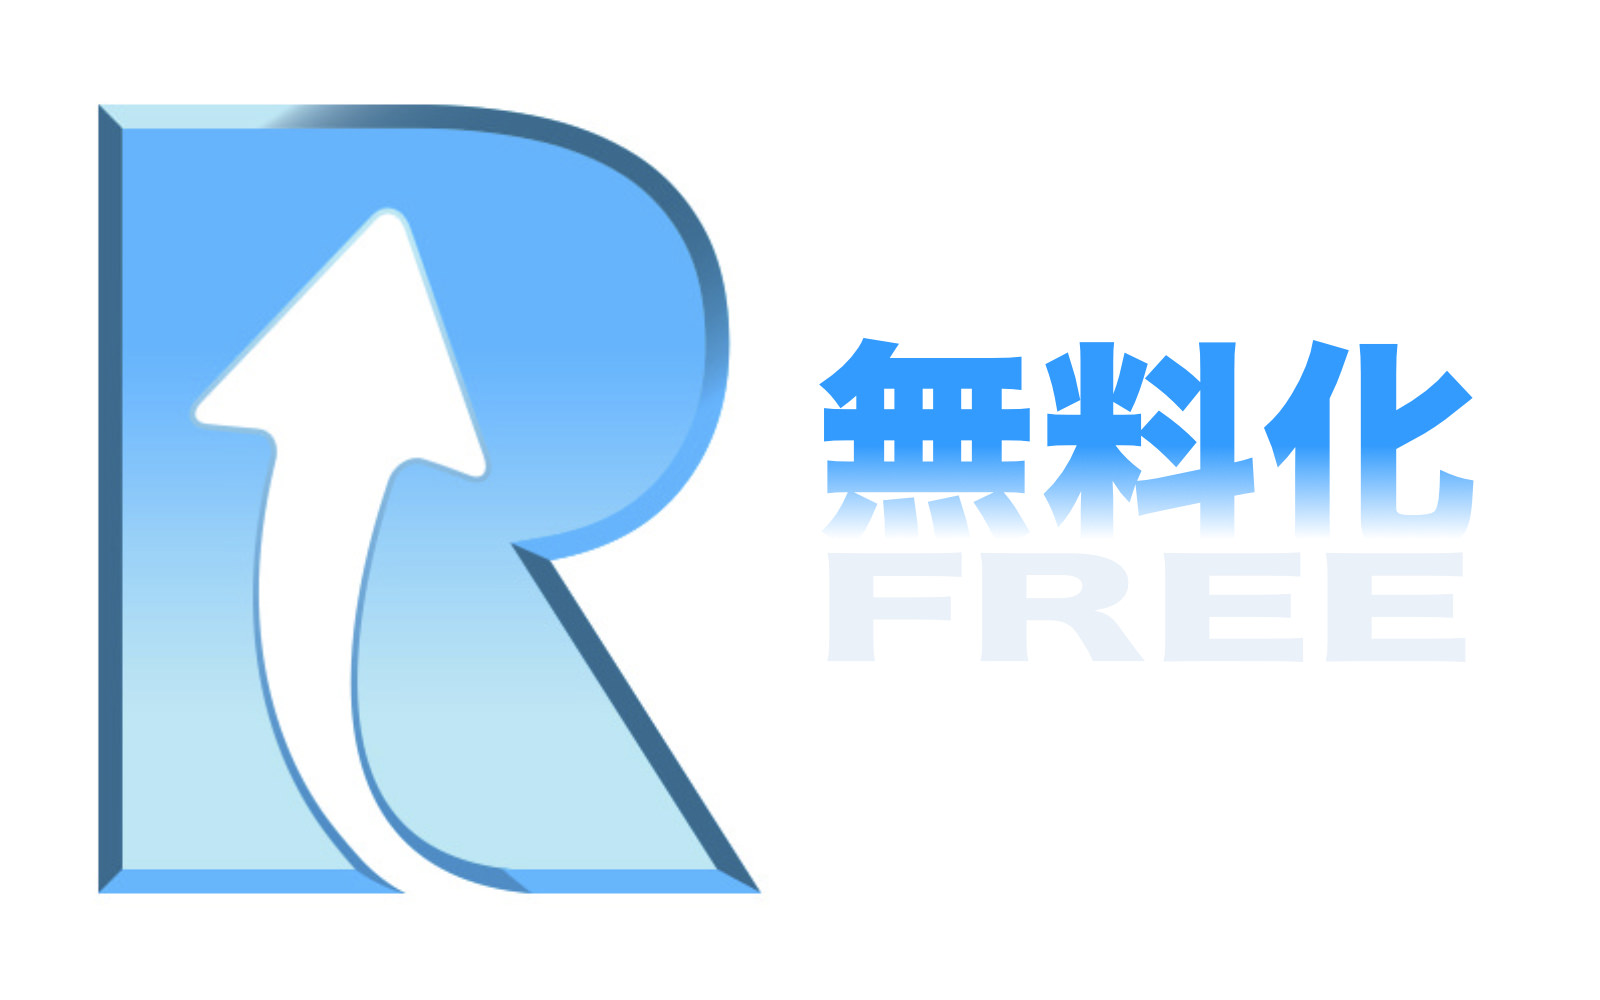 Refresh pro is now free